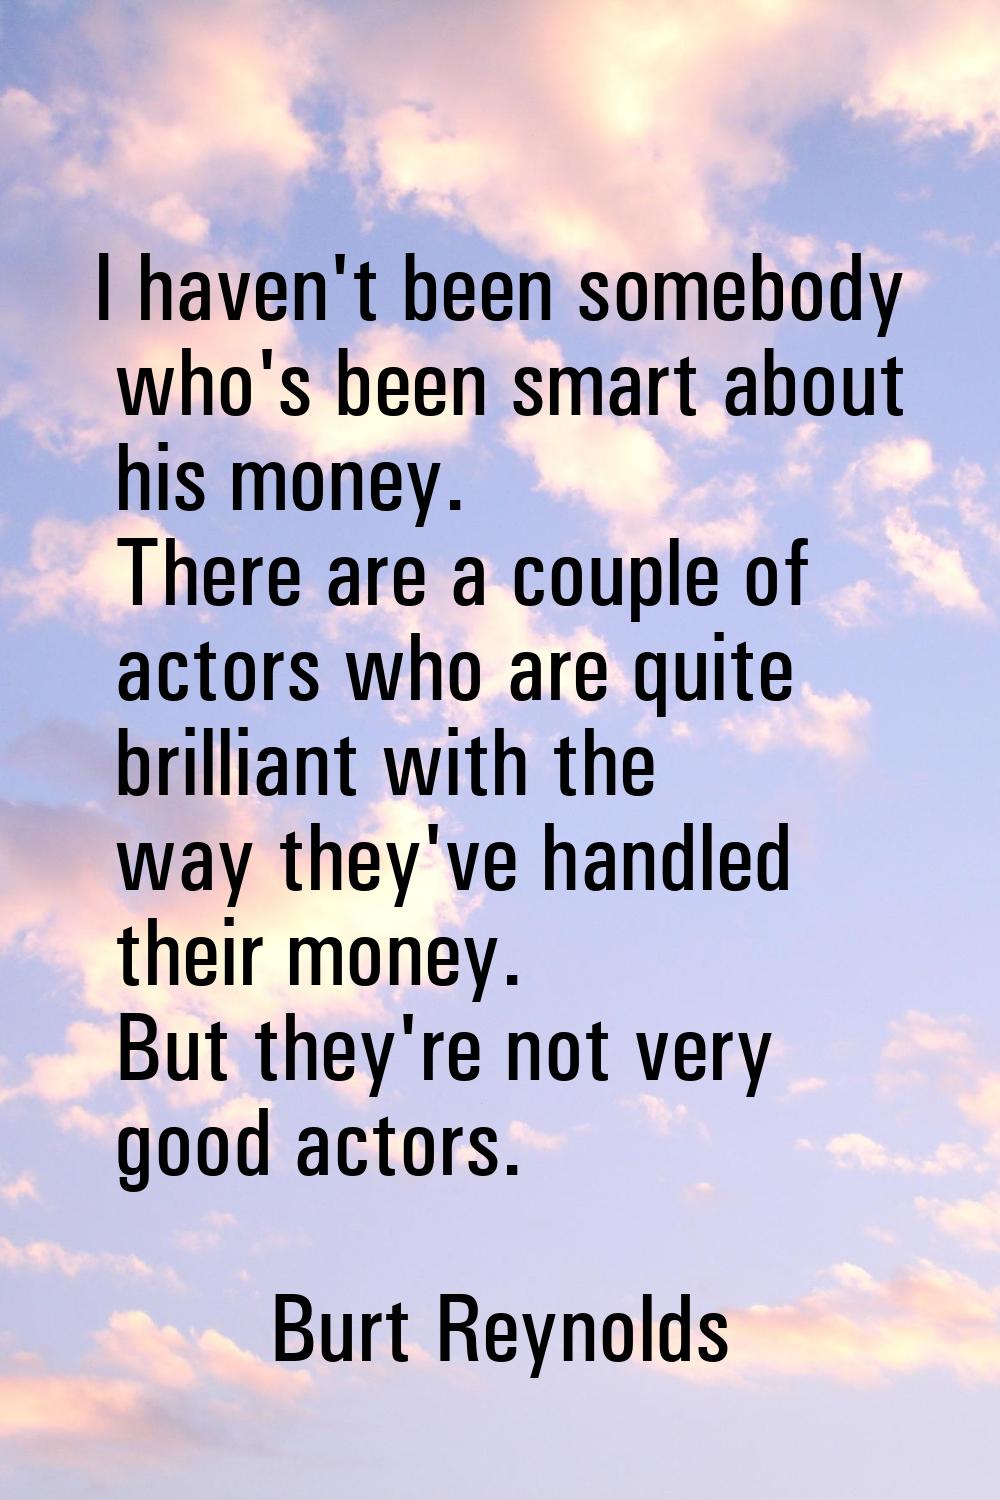 I haven't been somebody who's been smart about his money. There are a couple of actors who are quit